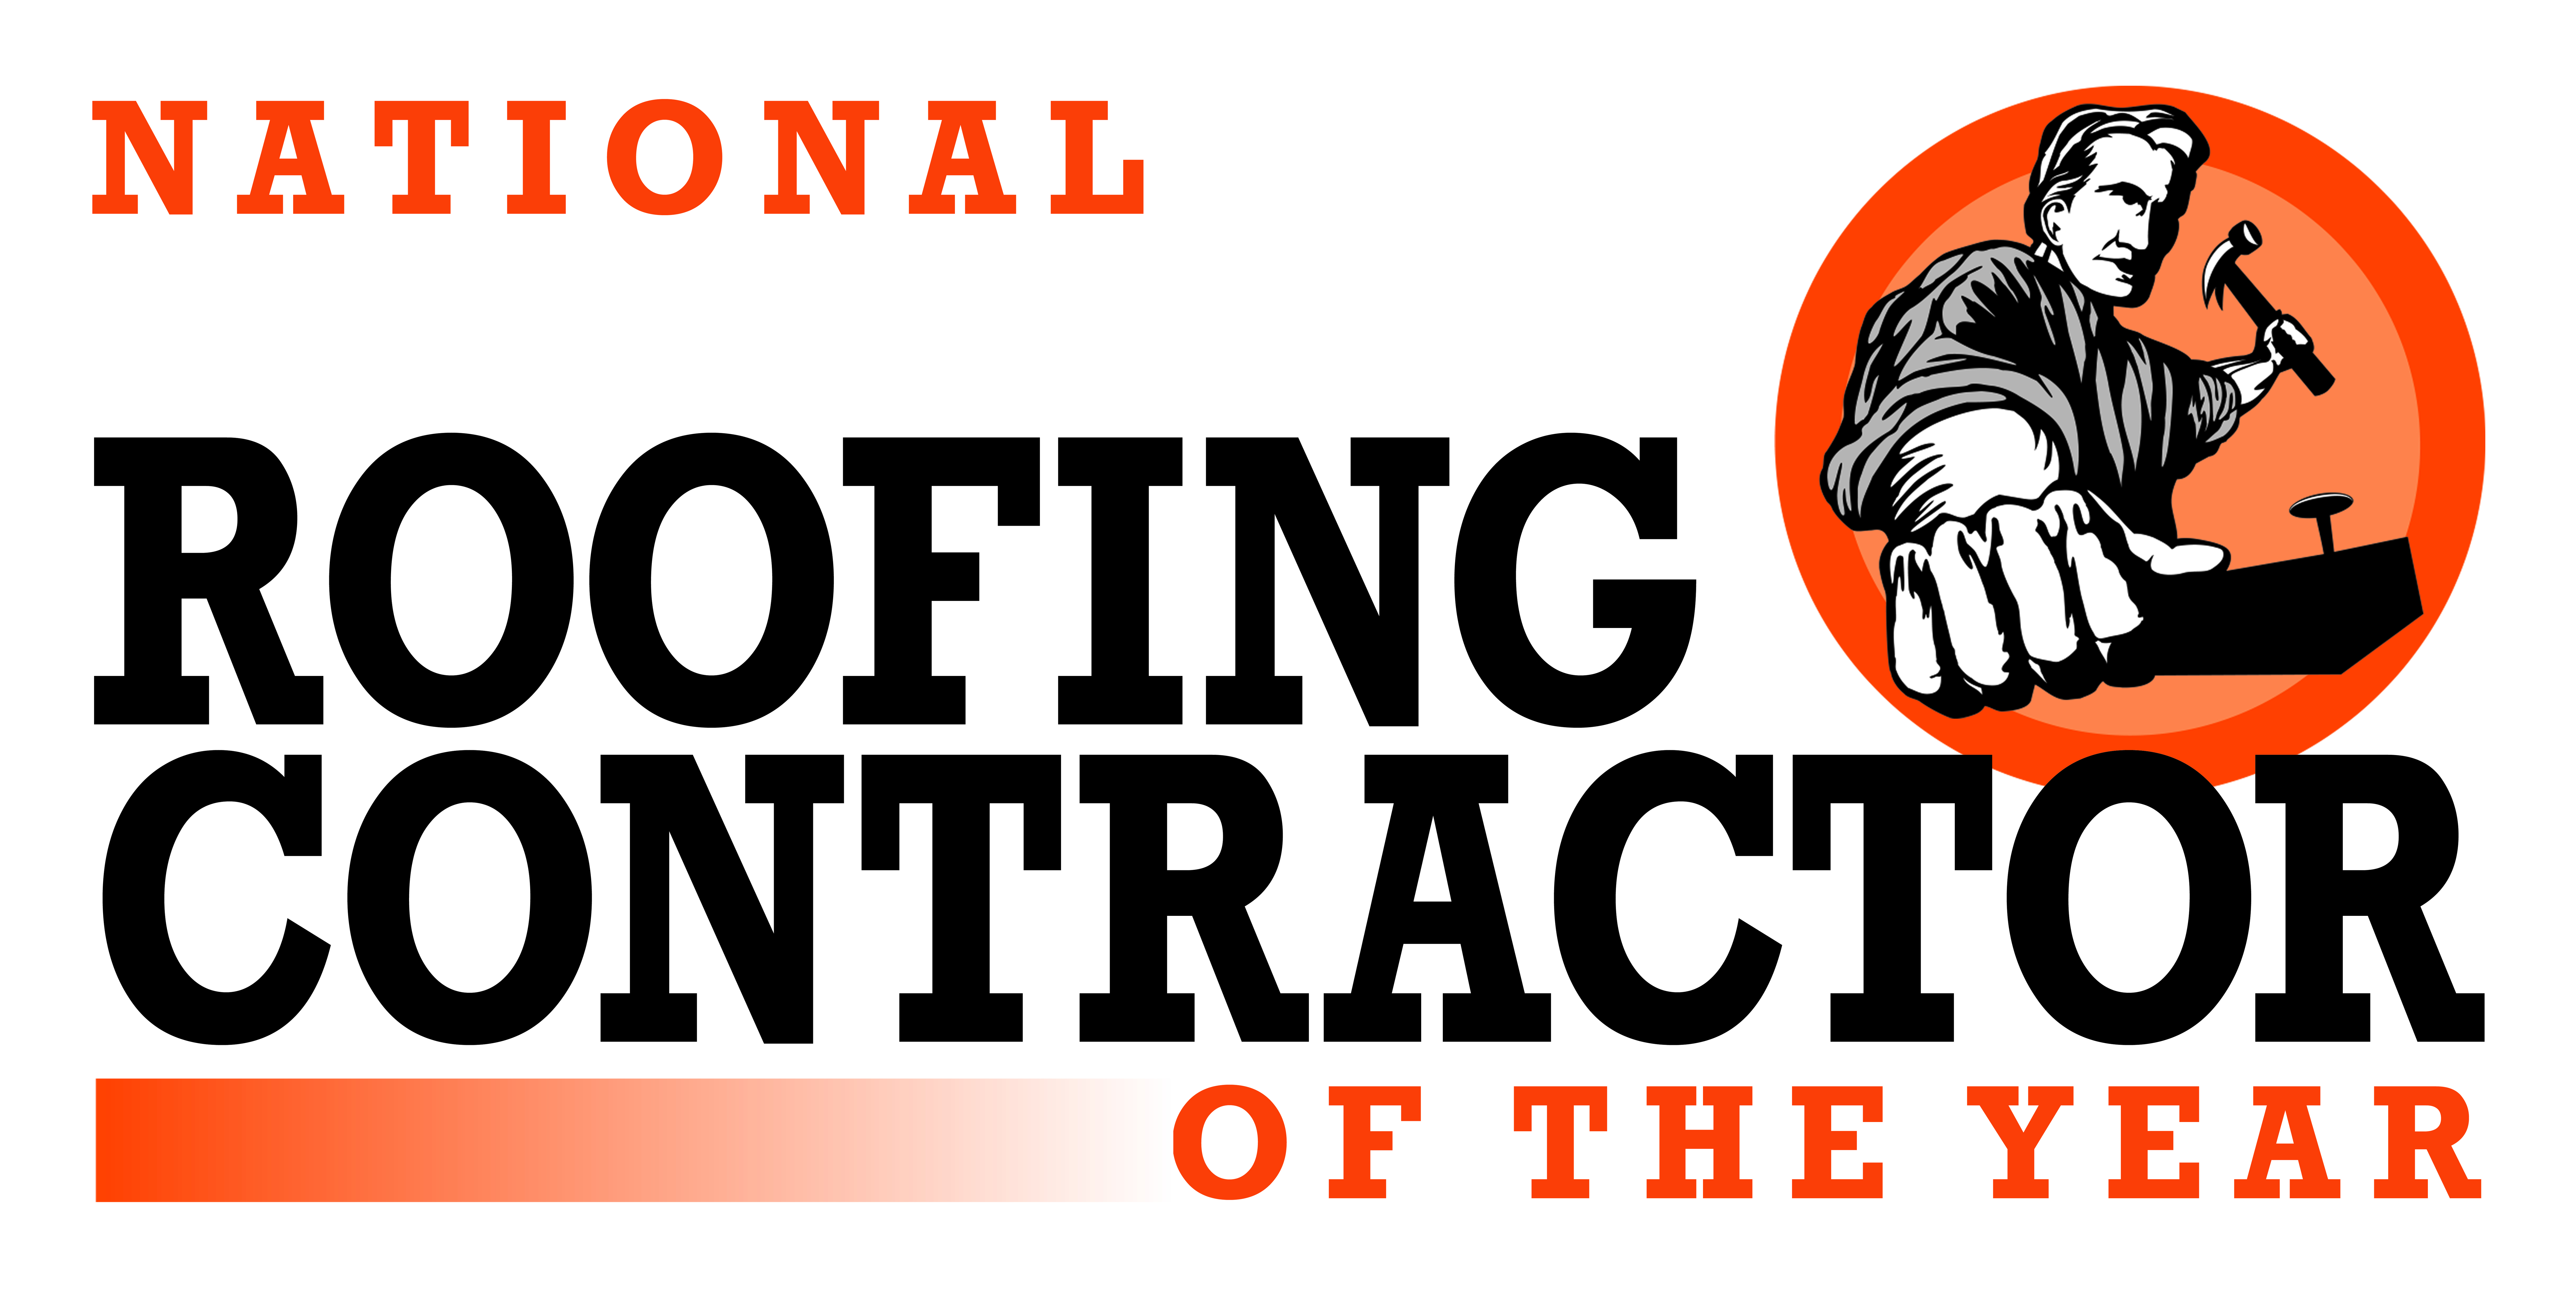 National Roofing Contractor of the Year